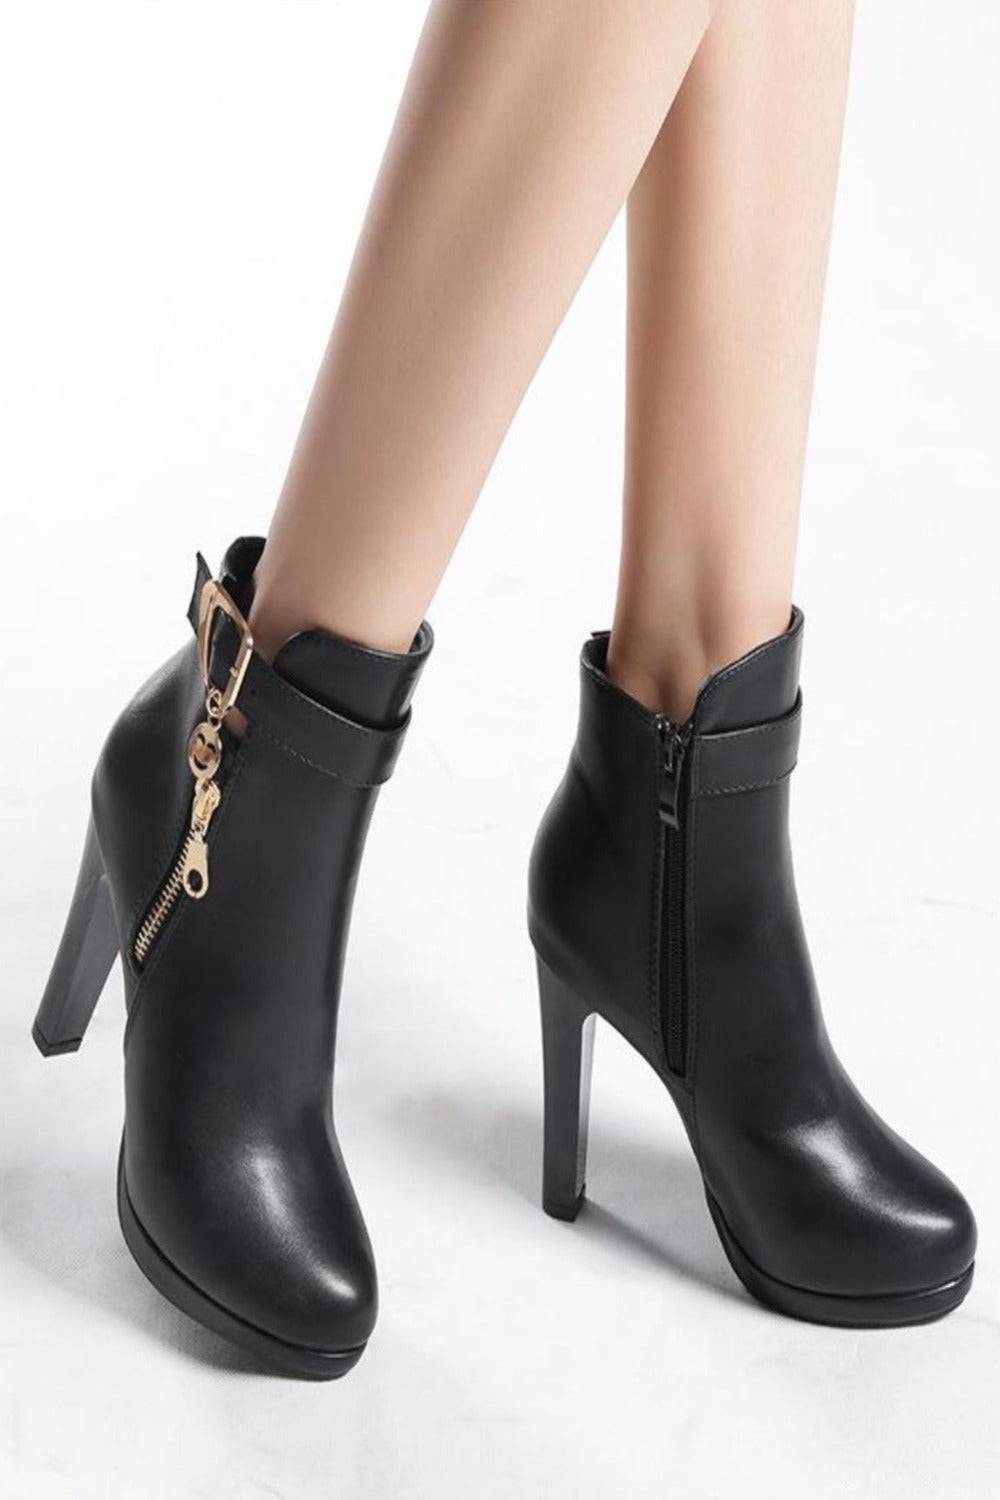 Buy Inc 5 Women Black Solid Heeled Boots - Boots for Women 1723759 | Myntra